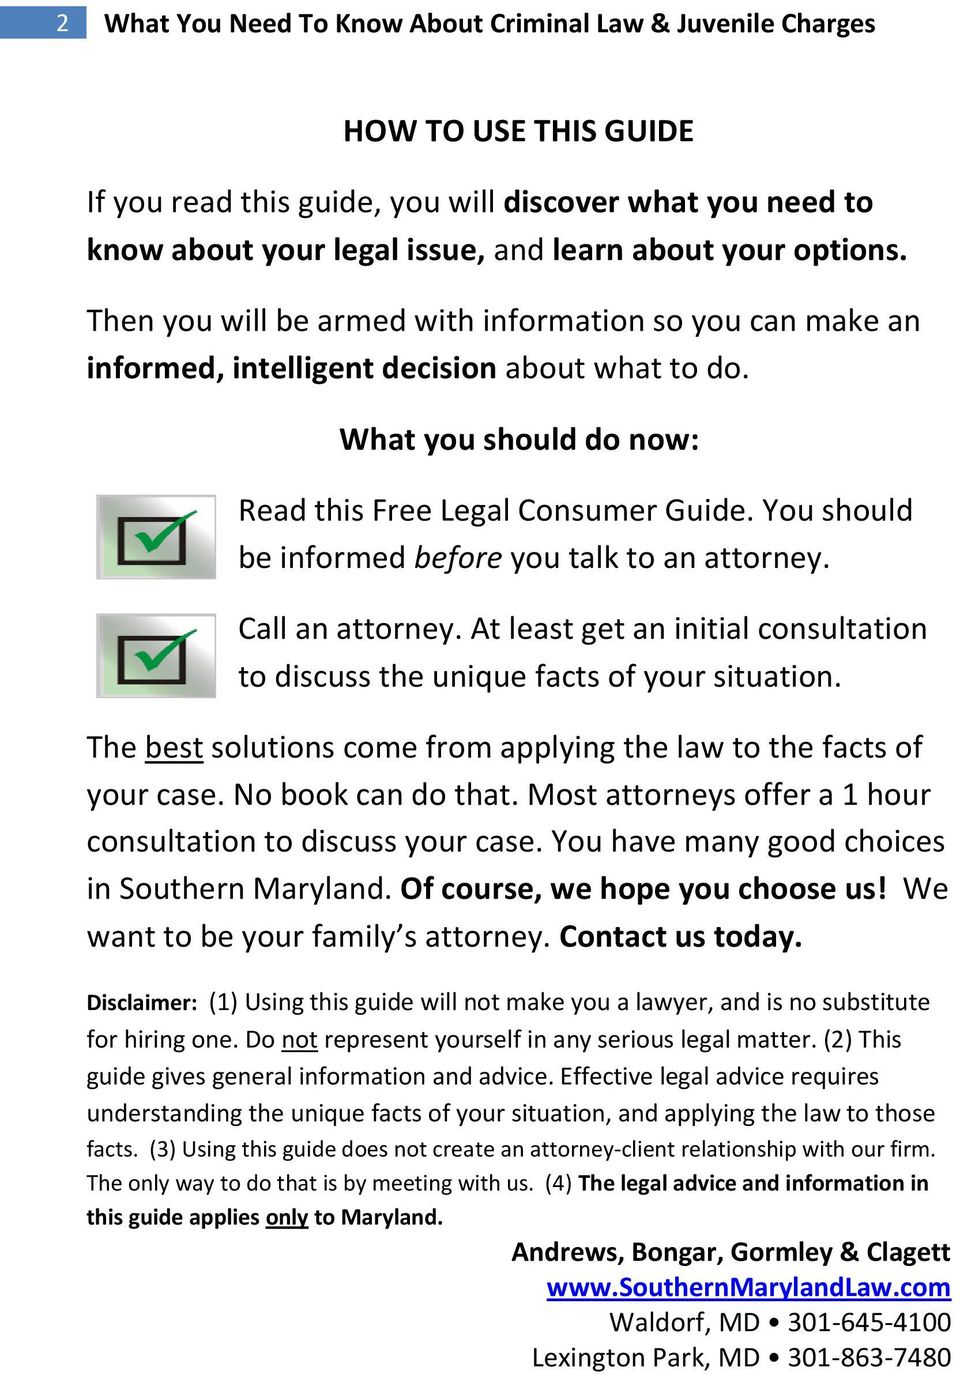 You should be informed before you talk to an attorney. Call an attorney. At least get an initial consultation to discuss the unique facts of your situation.